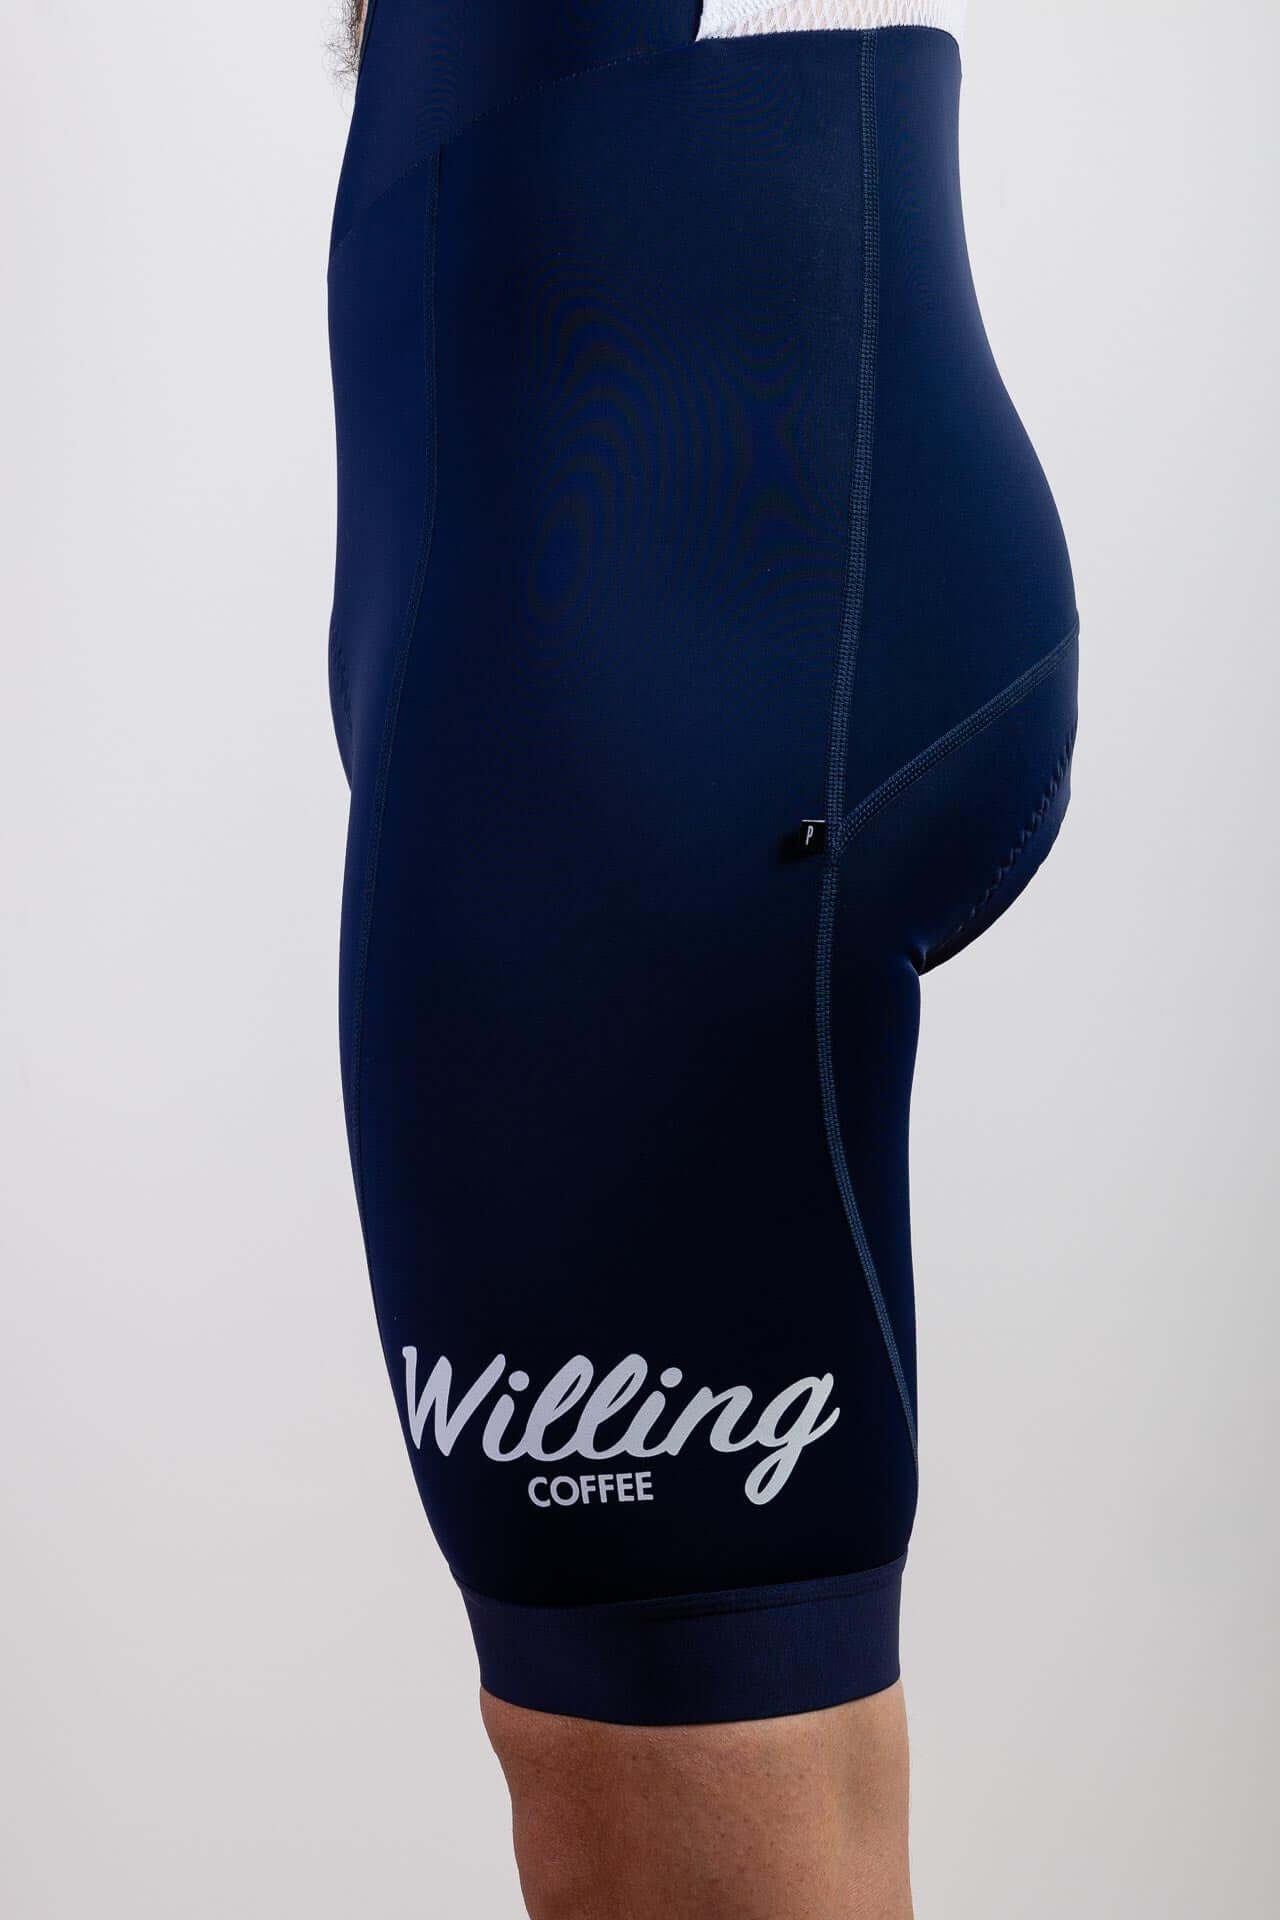 Willing Coffee Men's Cycling Bib Shorts in Dark Navy - Experience the ultimate ride with high-performance fabric. Style and comfort for your cycling adventures! 